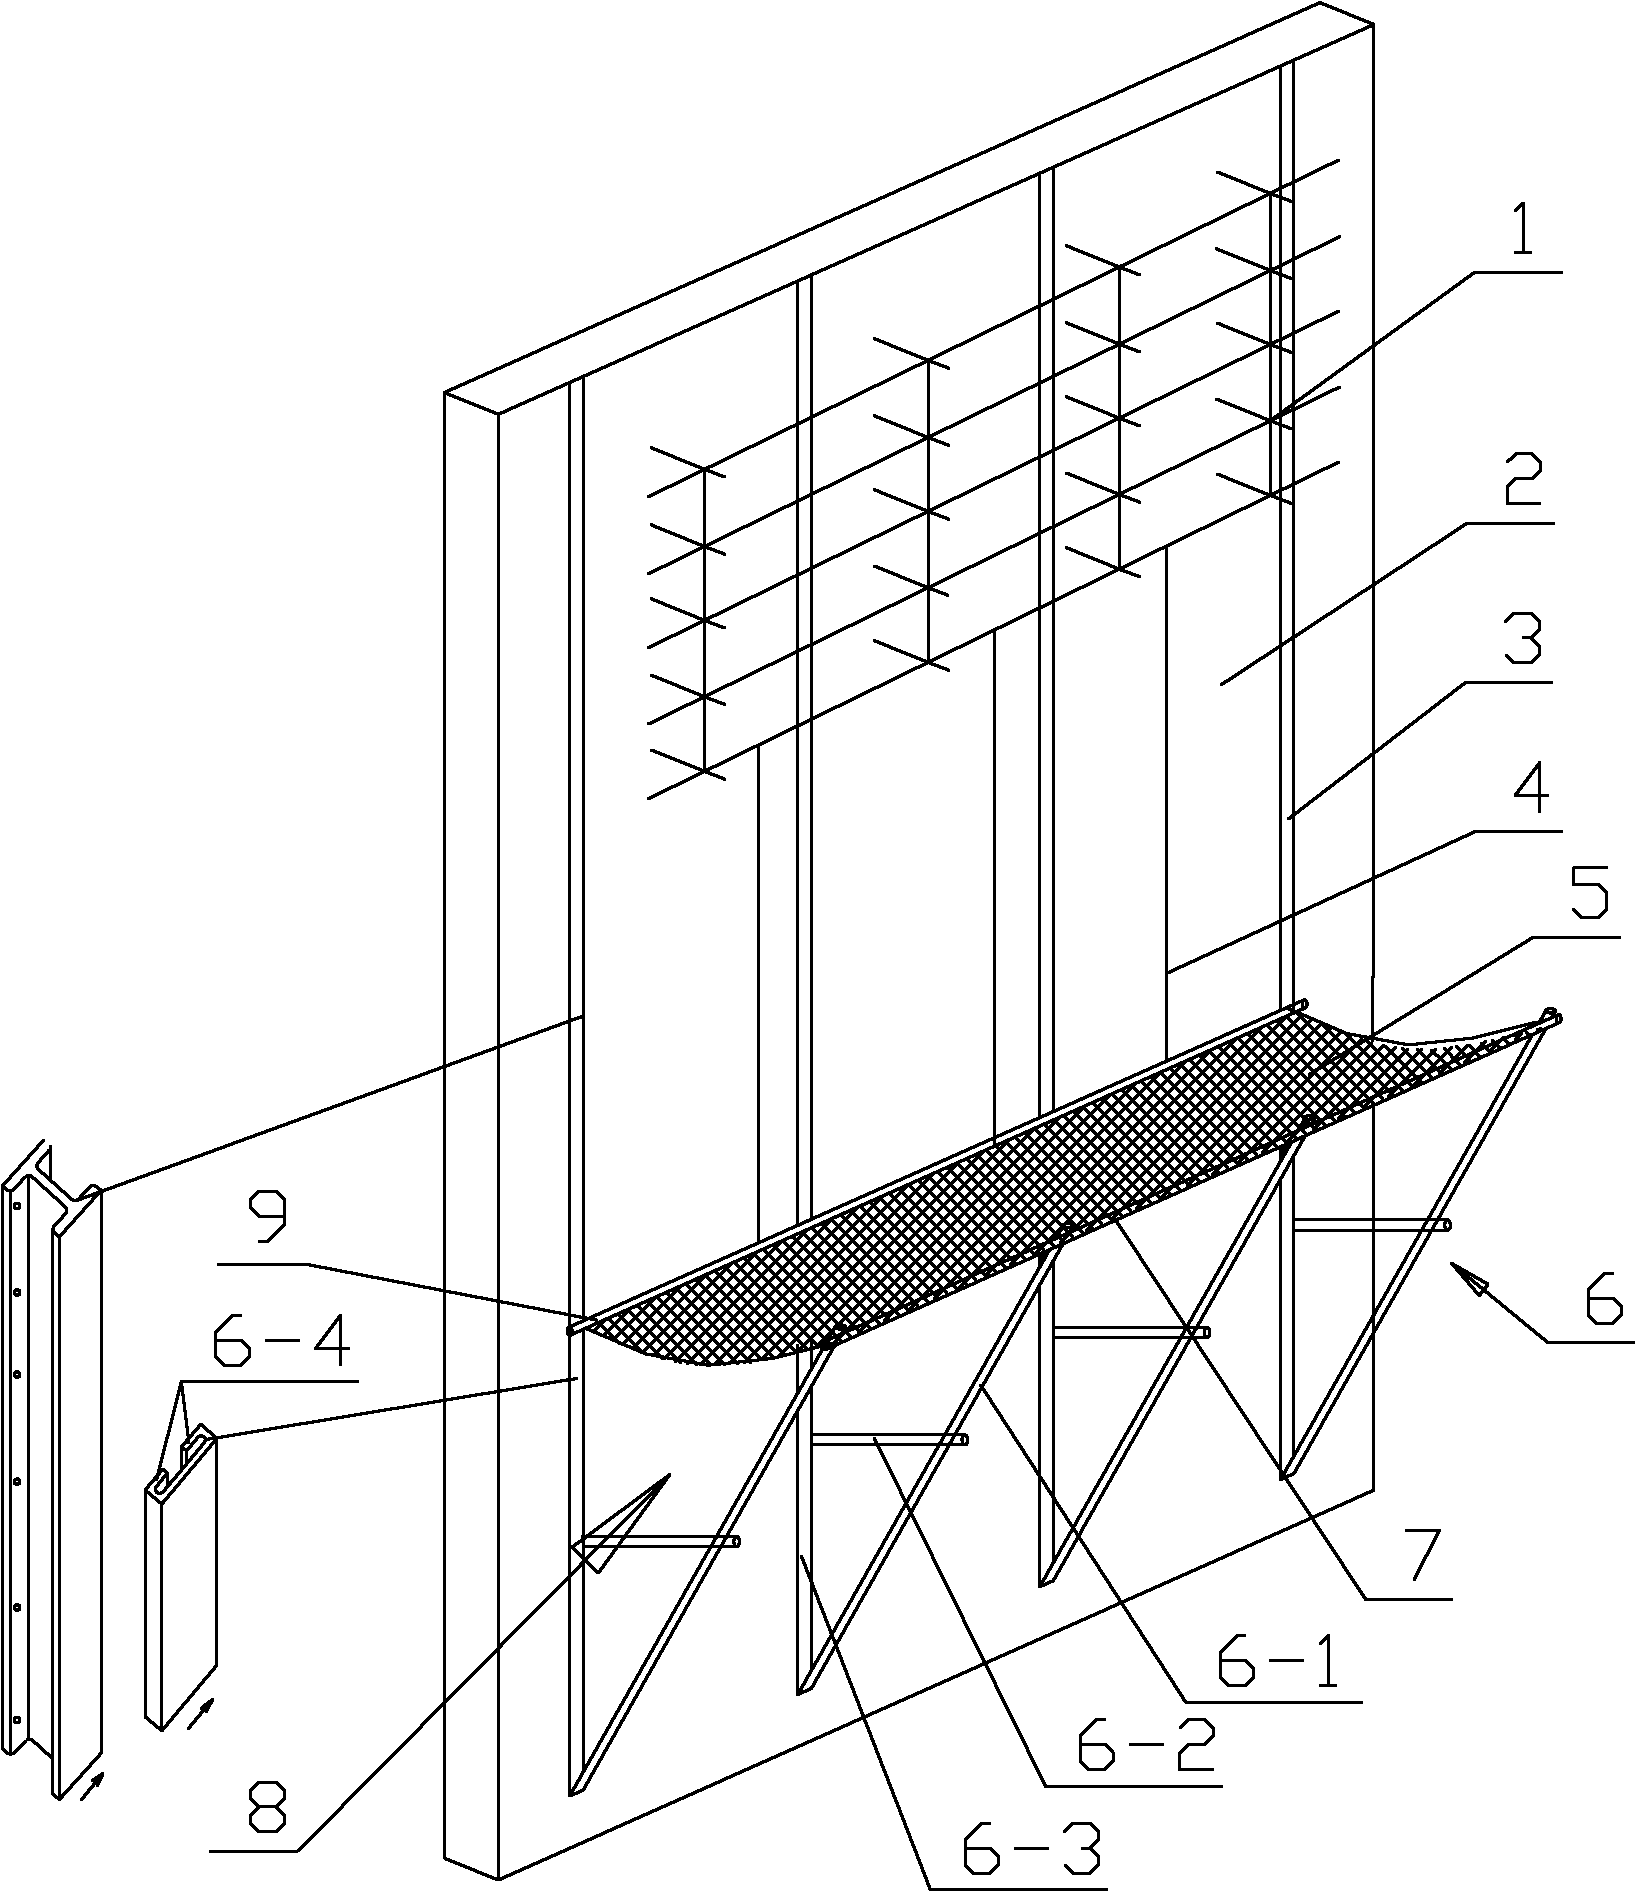 Construction method of safe flat net positioned on periphery of building